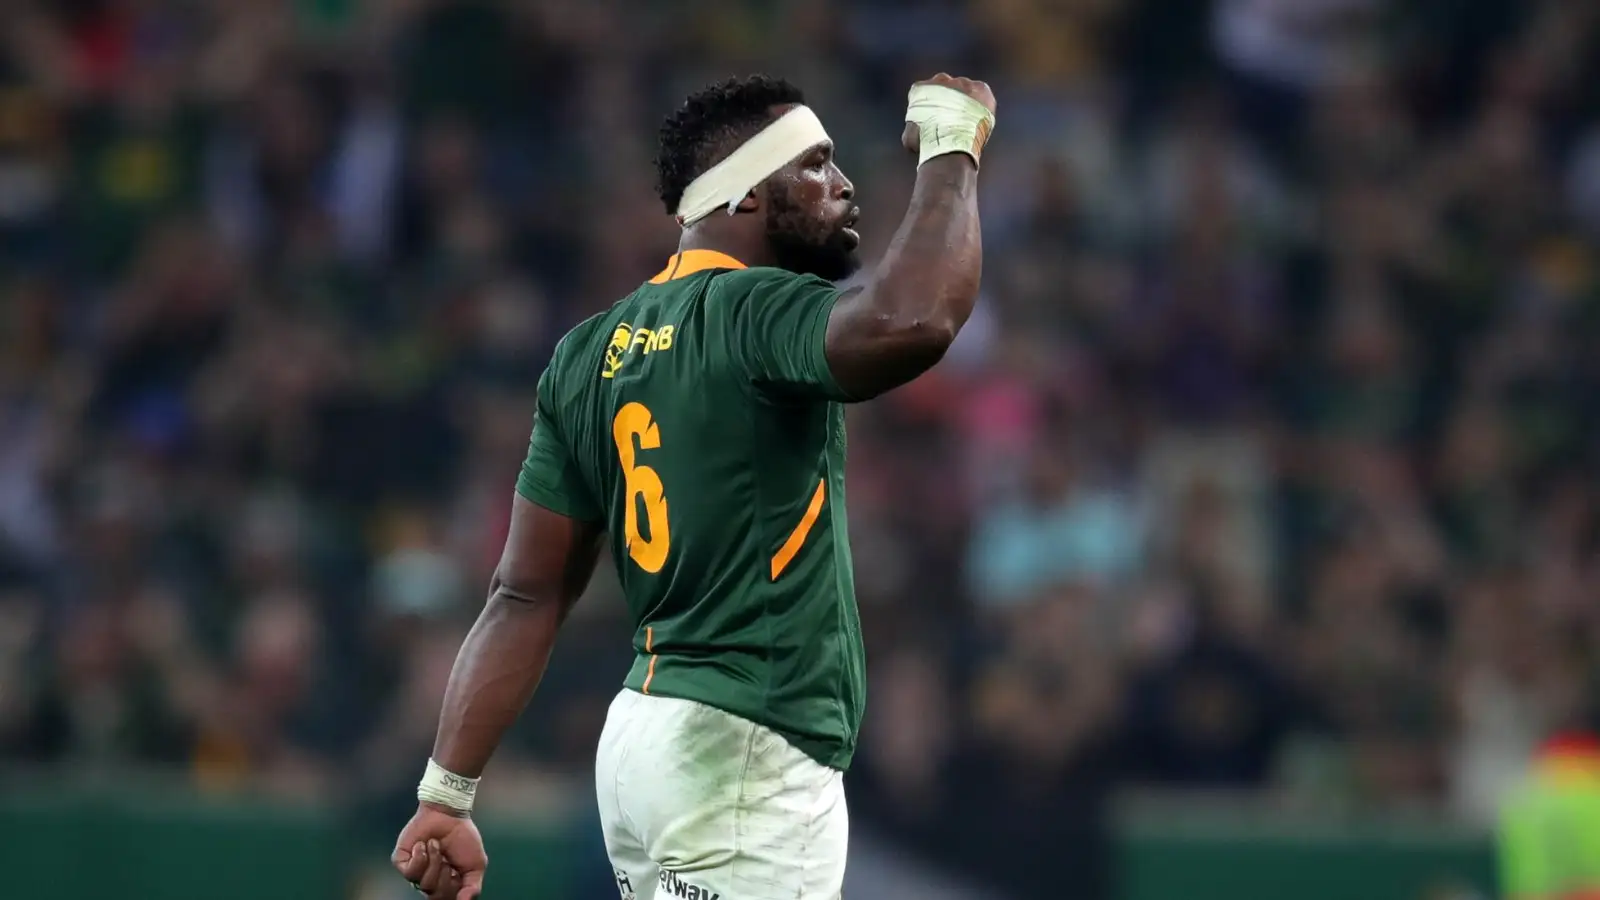 Siya Kolisi has revealed that Dan Carter was part of the reason why he joined Racing 92, after he sought advice from the All Blacks' great. Kolisi was unveiled as Racing 92's newest signing ahead of the 2023/24 season last week, with Dan Carter playing a small role in his decision.